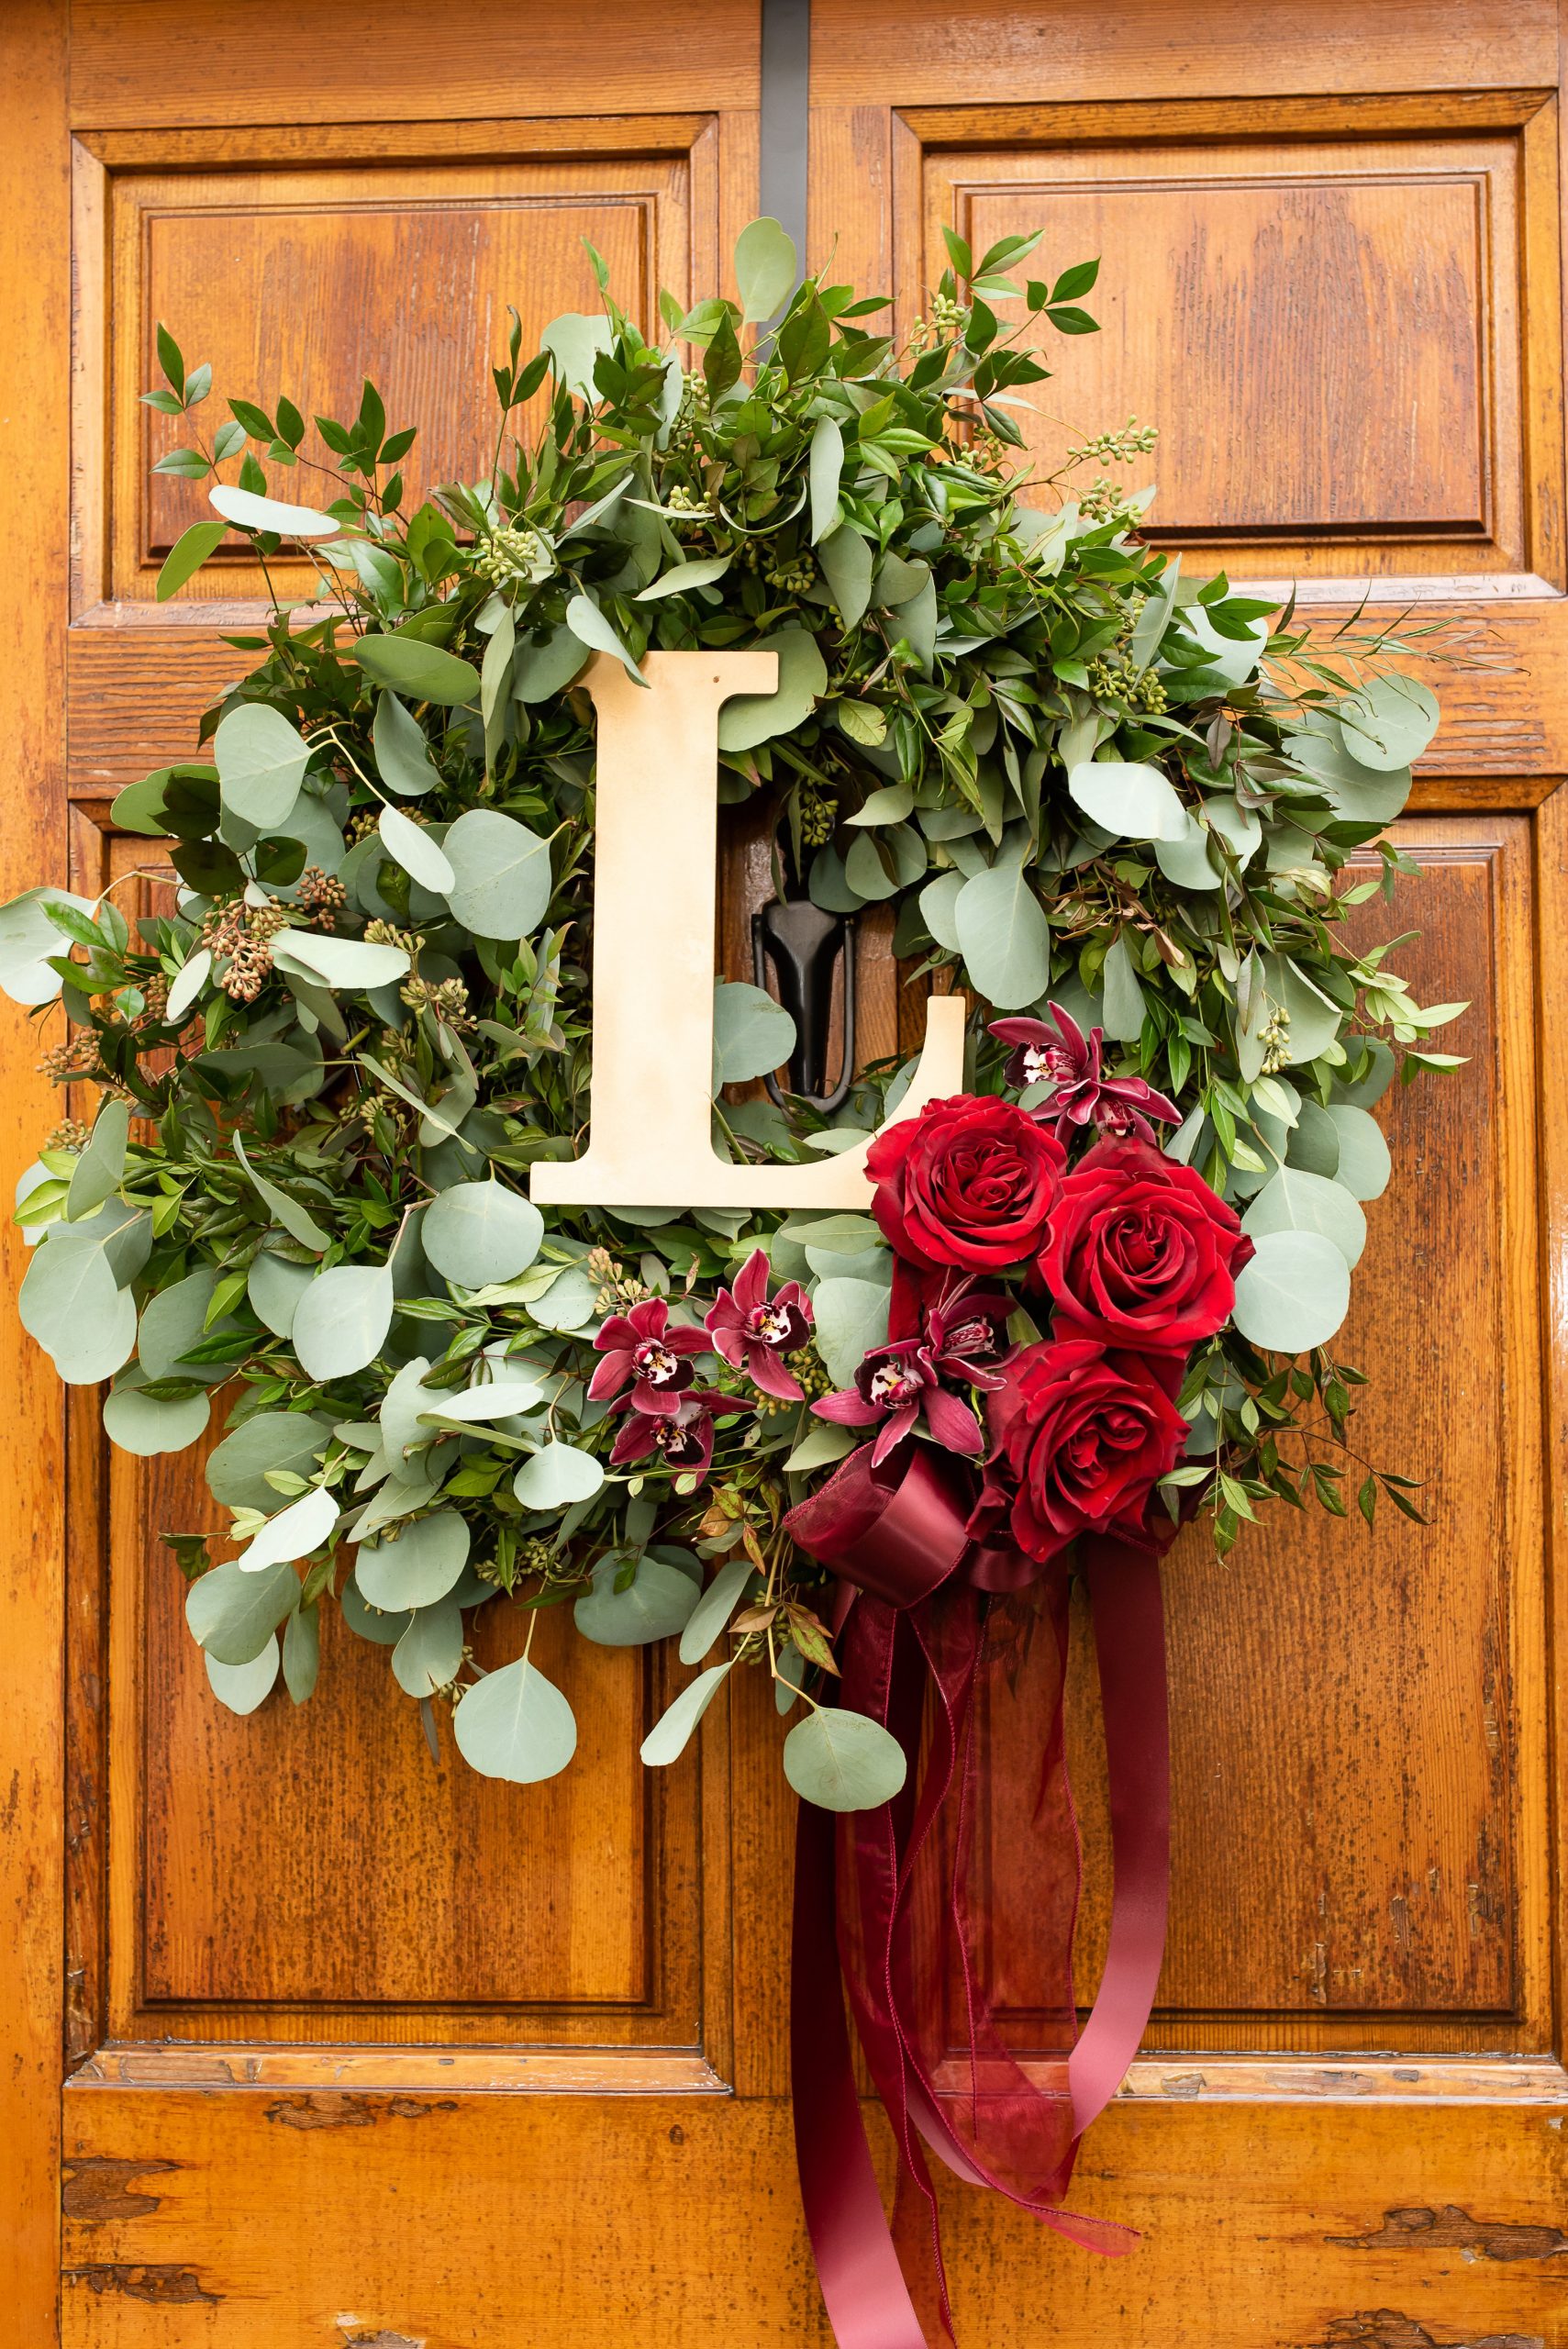 Stems Atlanta Wedding Florist, Atlanta Wedding Planner, www.stemsatlanta.com, Beautiful Surprise Winter Wedding at a residence featuring a flowing wreath with whimsical Eucalyptus and accents of Red Roses.